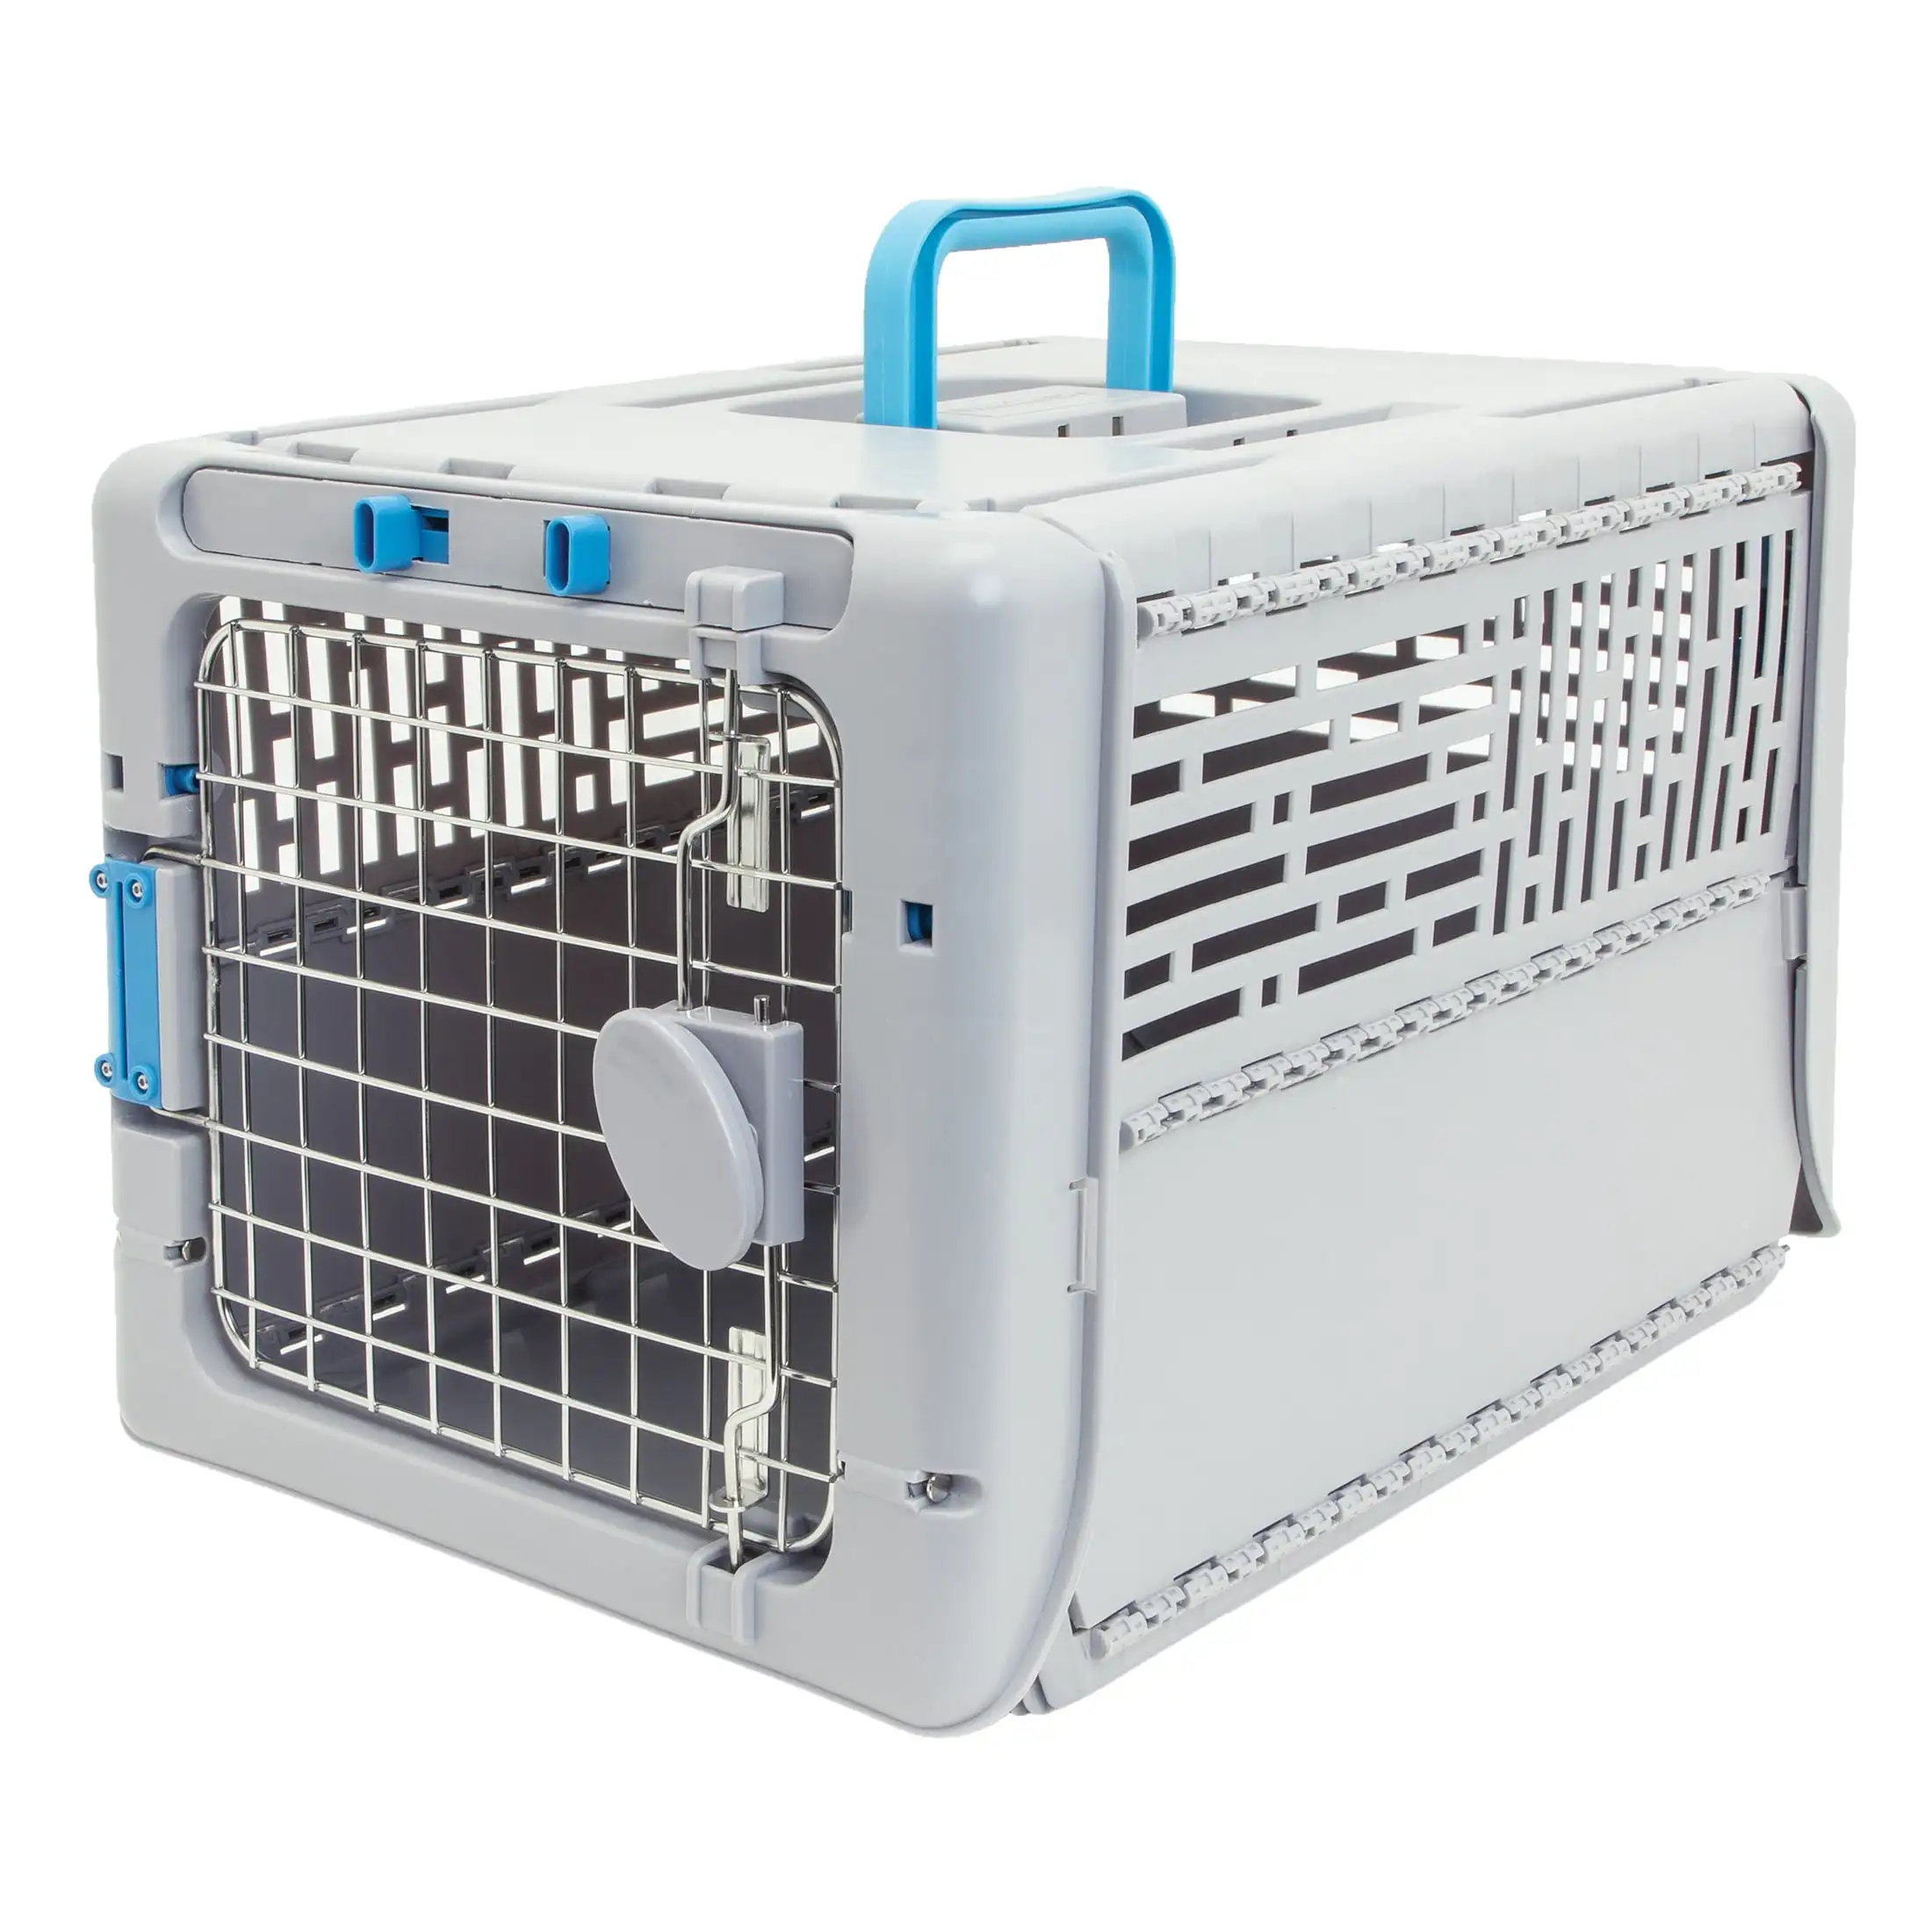 

Dog Kennels, 19" Collapsible Plastic Pet Kennel, Gray, Small, 1 Piece, Dog Cage,19.63 X 13.50 X 12.00 Inches